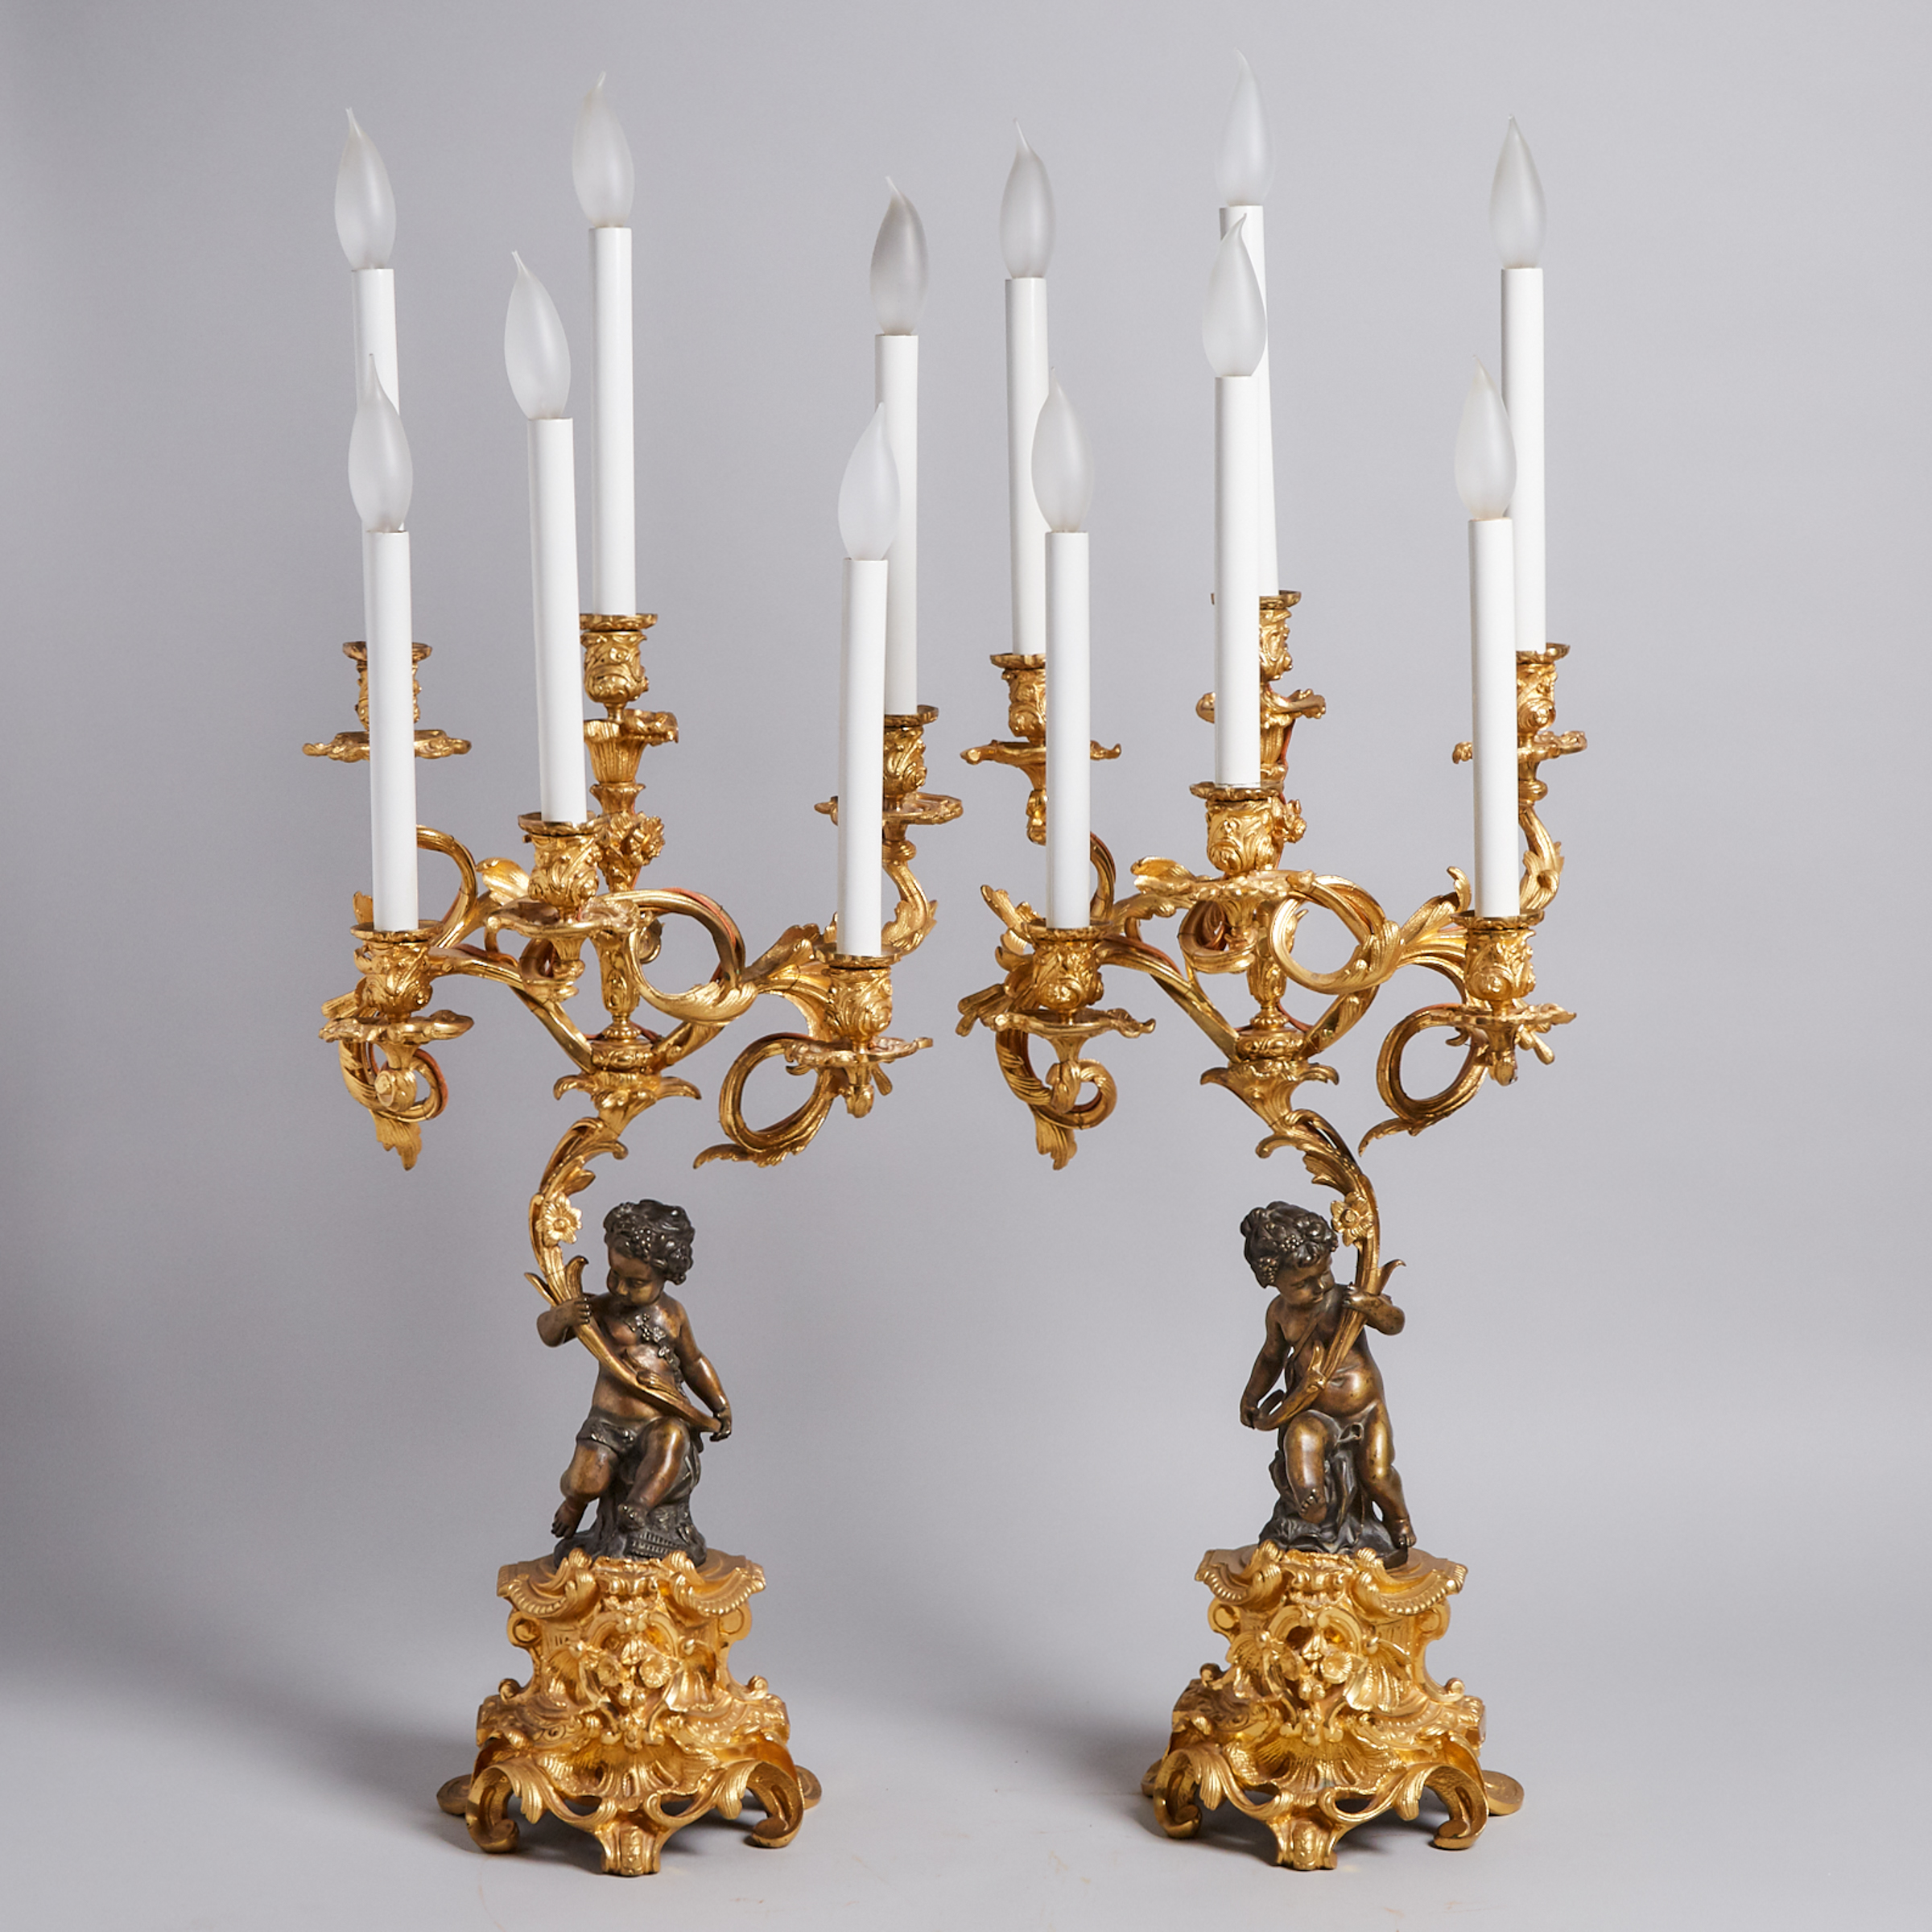 Pair of Napoleon III Gilt and Patinated Bronze Figural Candelabra, 20th century